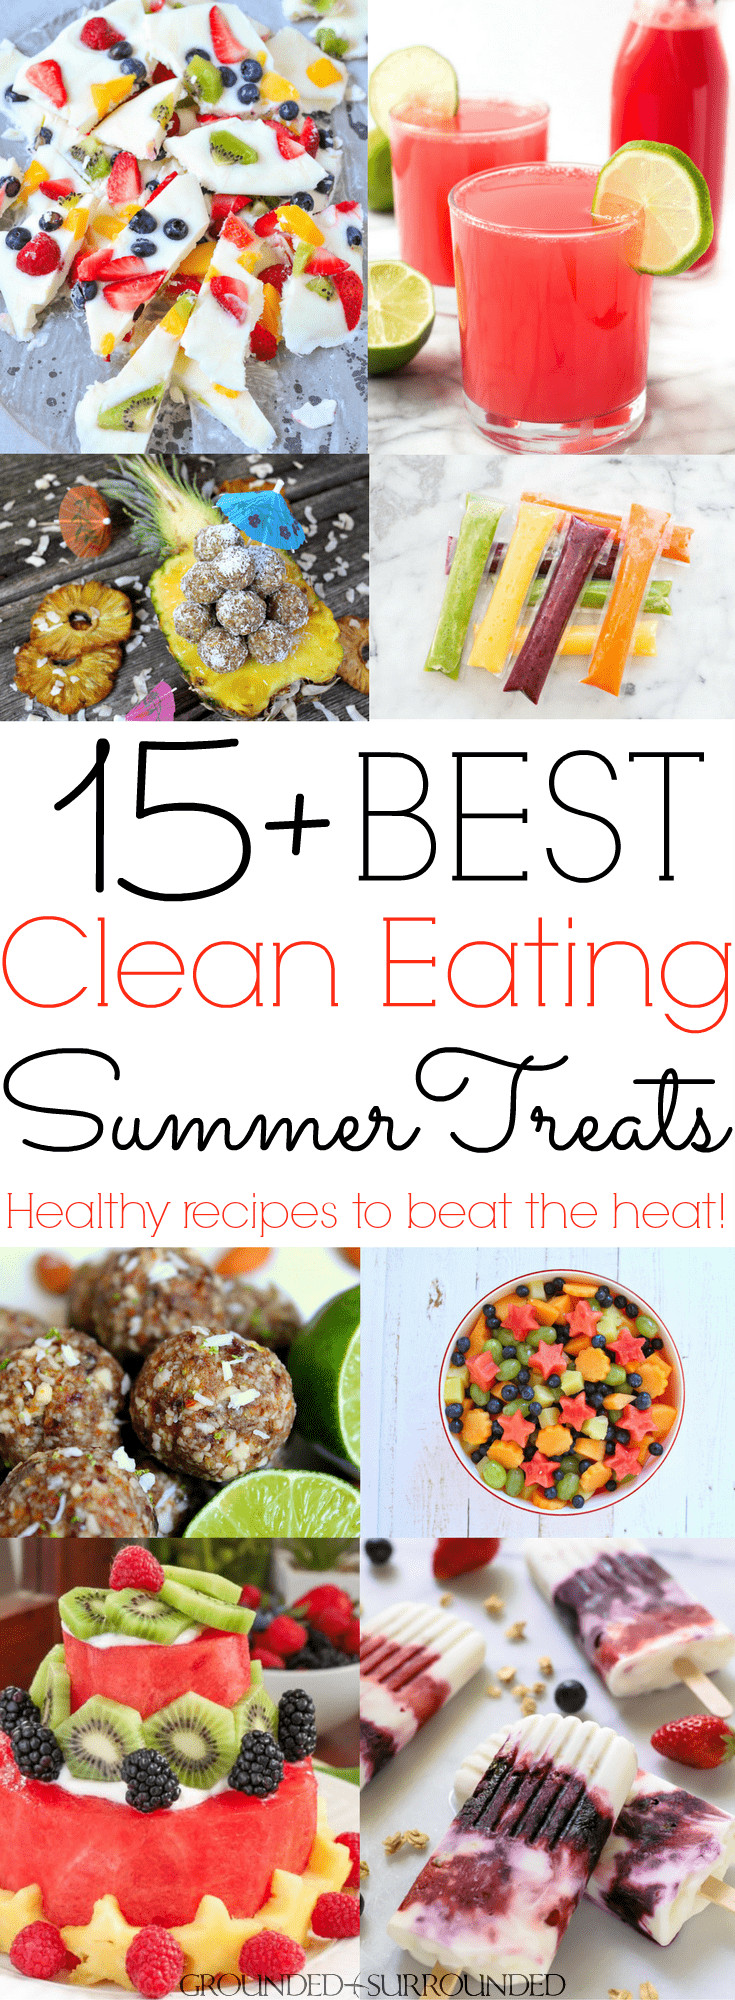 Clean Eating Summer Recipes
 15 Best Clean Eating Summer Treats